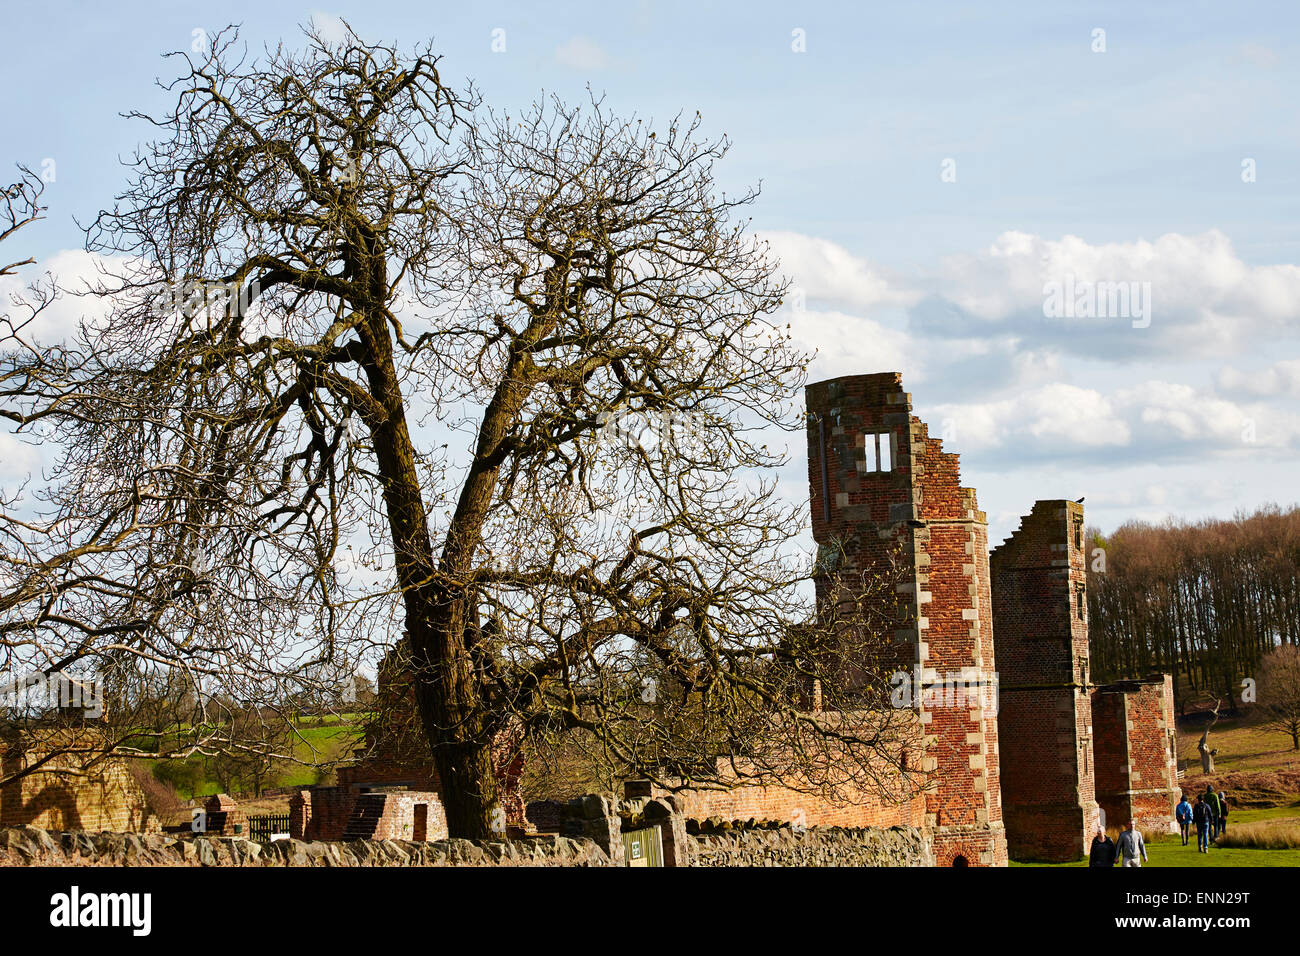 Large tree among the ruins of Bradgate House in Bradgate Park, Leicestershire, England, UK. Stock Photo